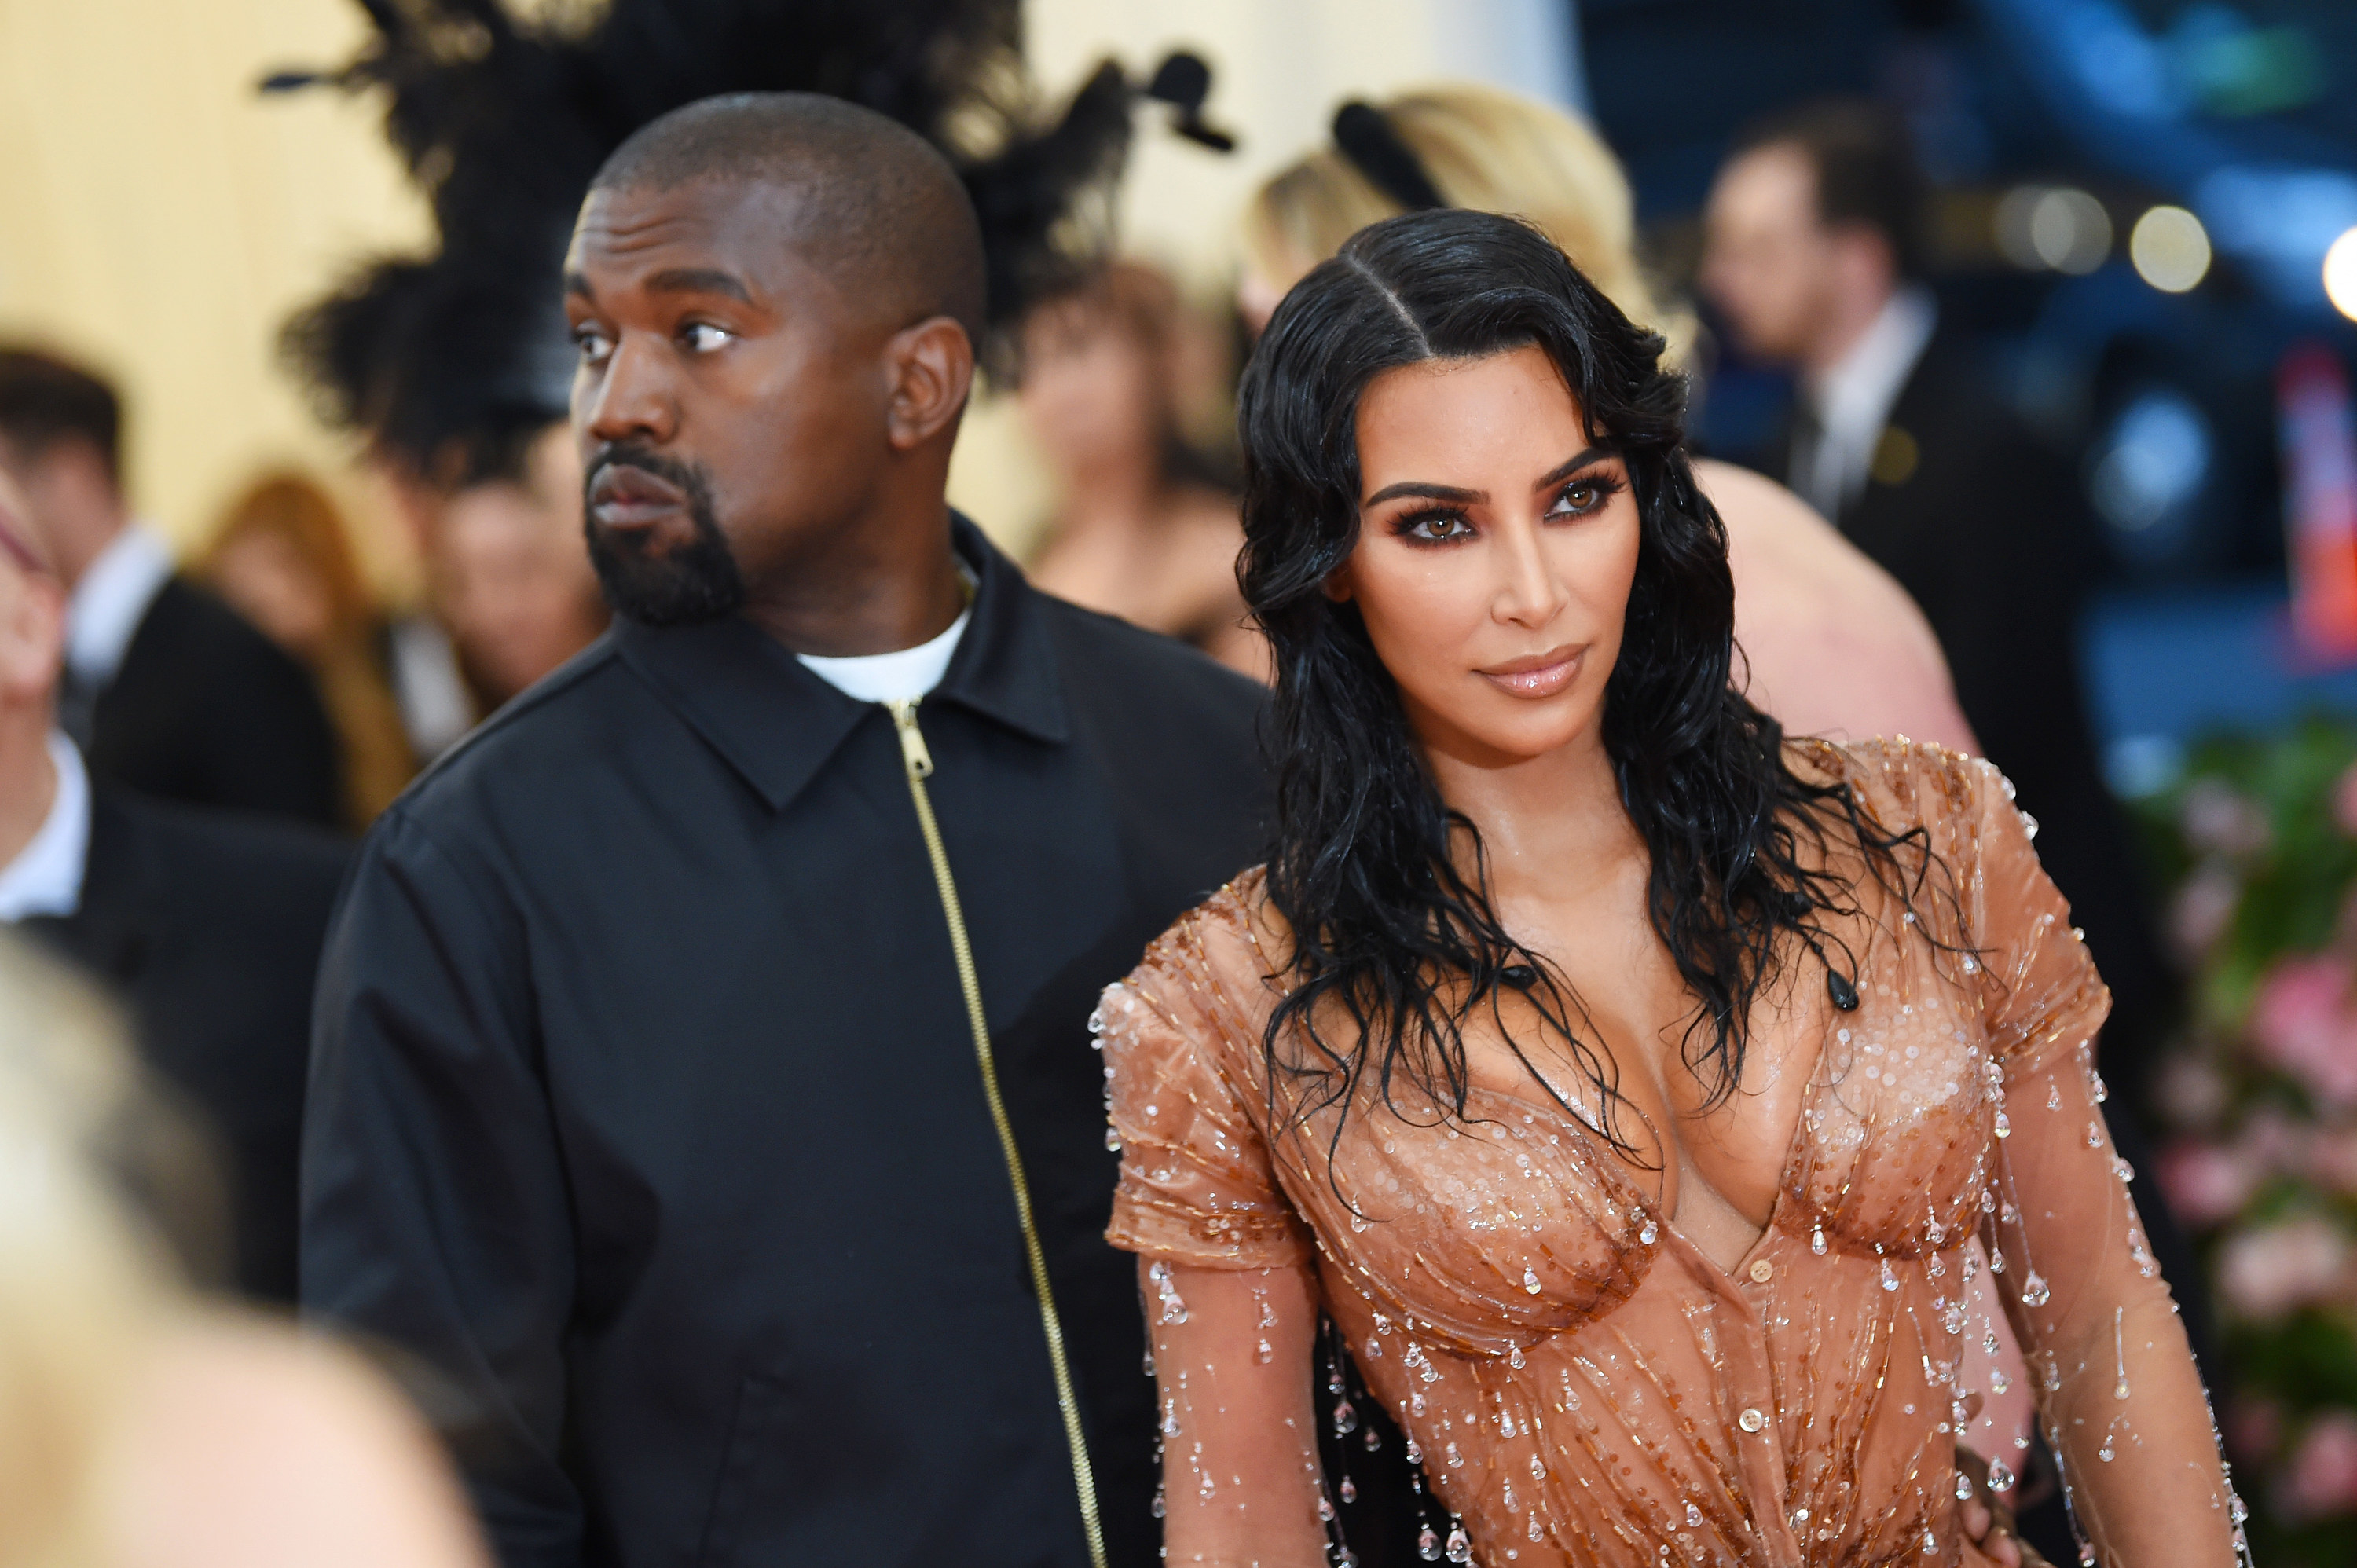 Kim in a corset dress stands in front of Kanye in a black pullover jacket